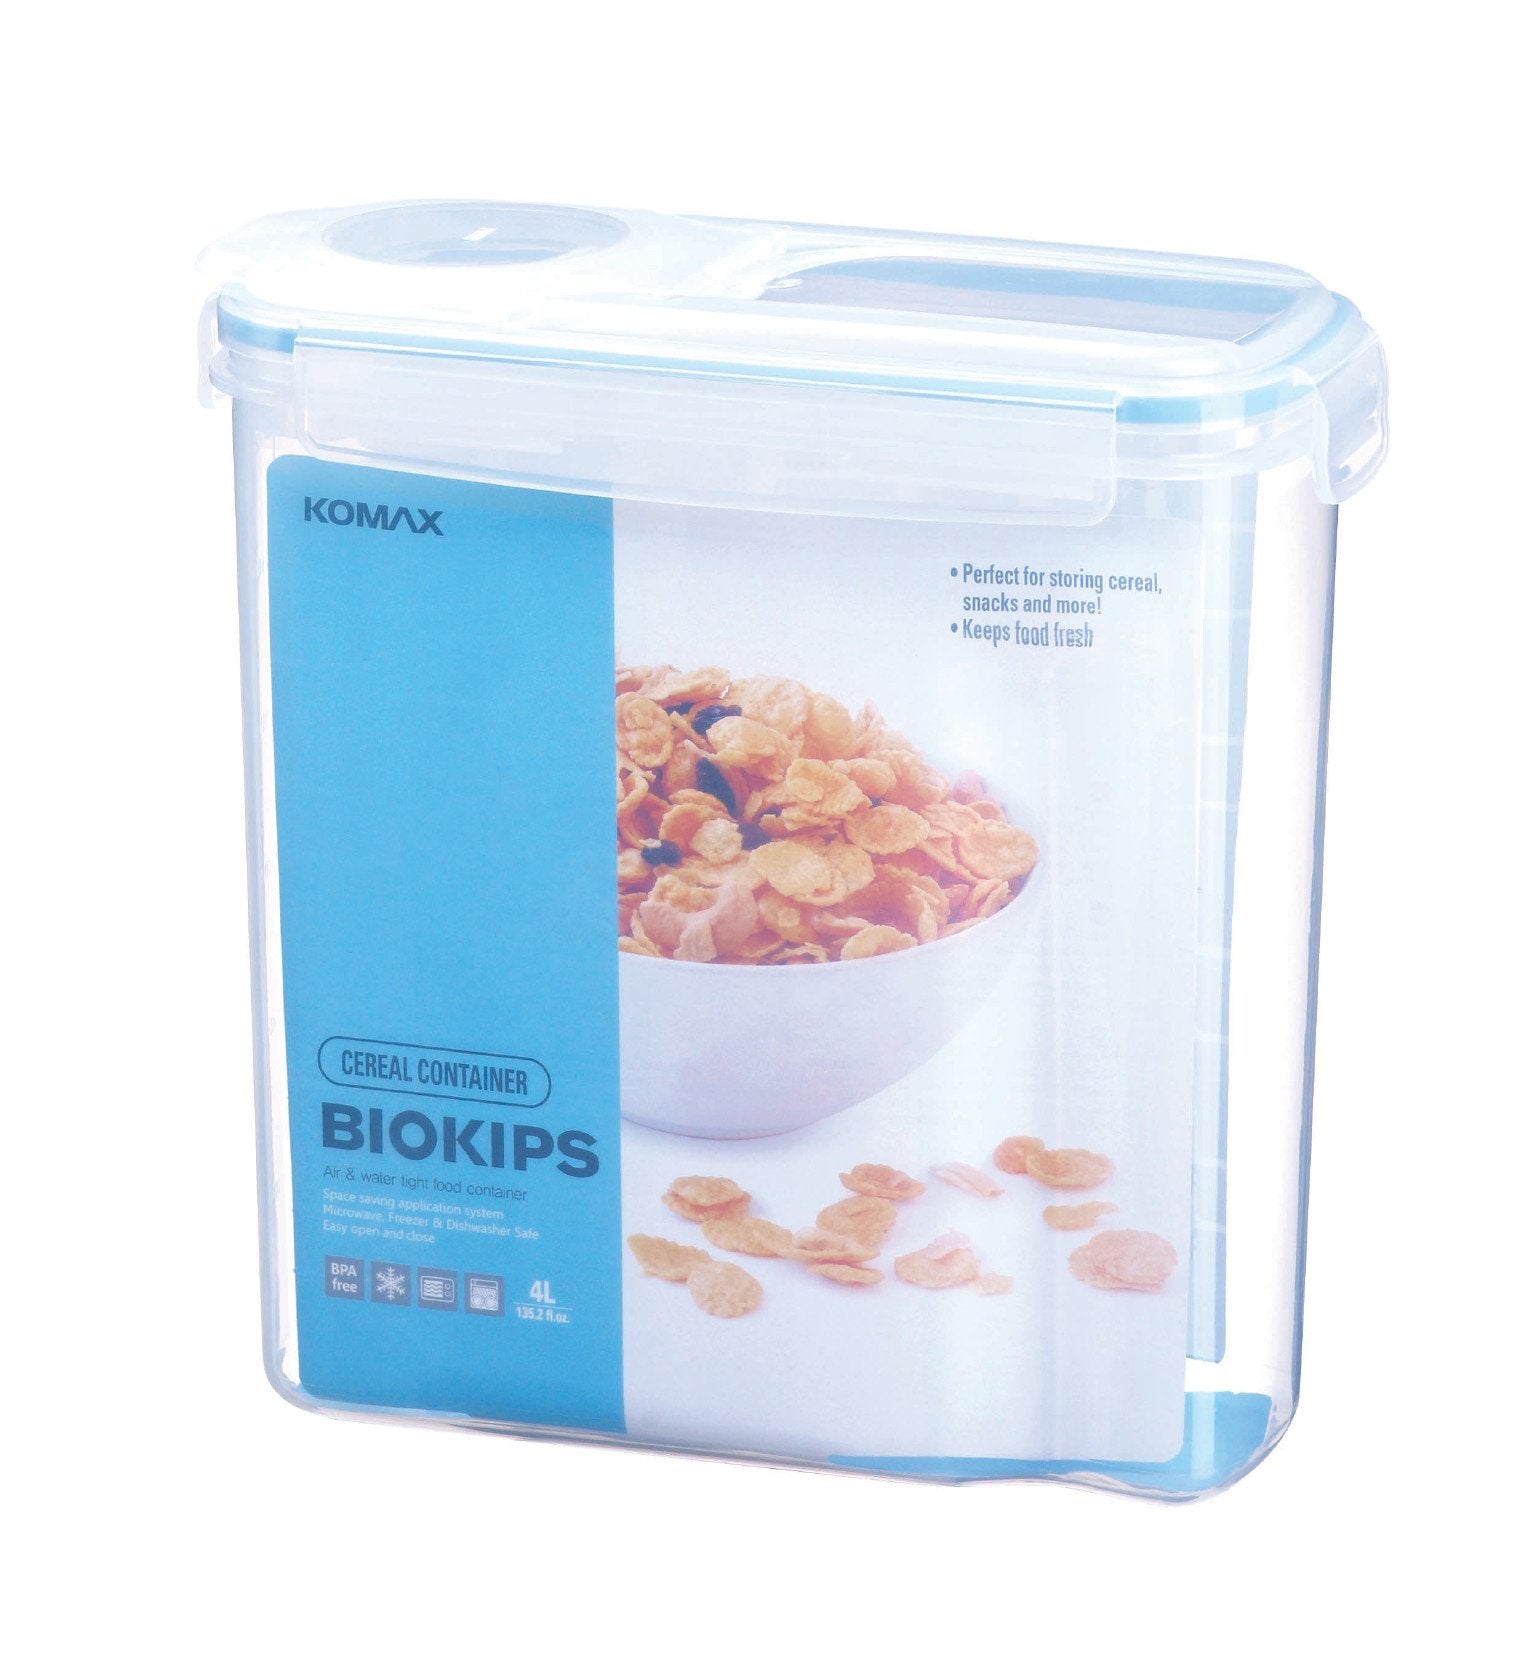 4-Piece/135.2 fl oz Airtight Food Storage Containers for Cereal, Snack